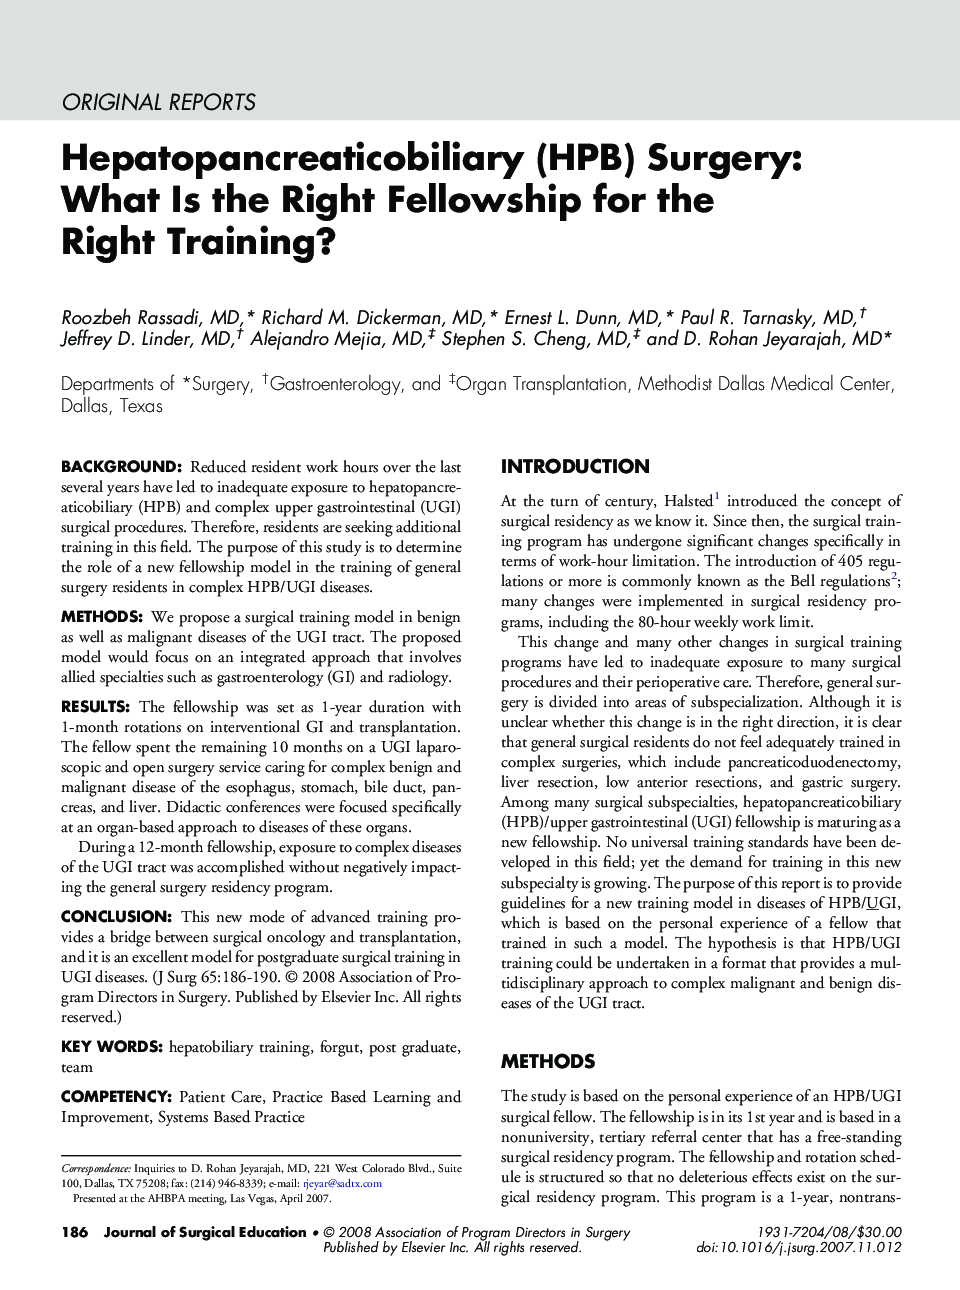 Hepatopancreaticobiliary (HPB) Surgery: What Is the Right Fellowship for the Right Training?